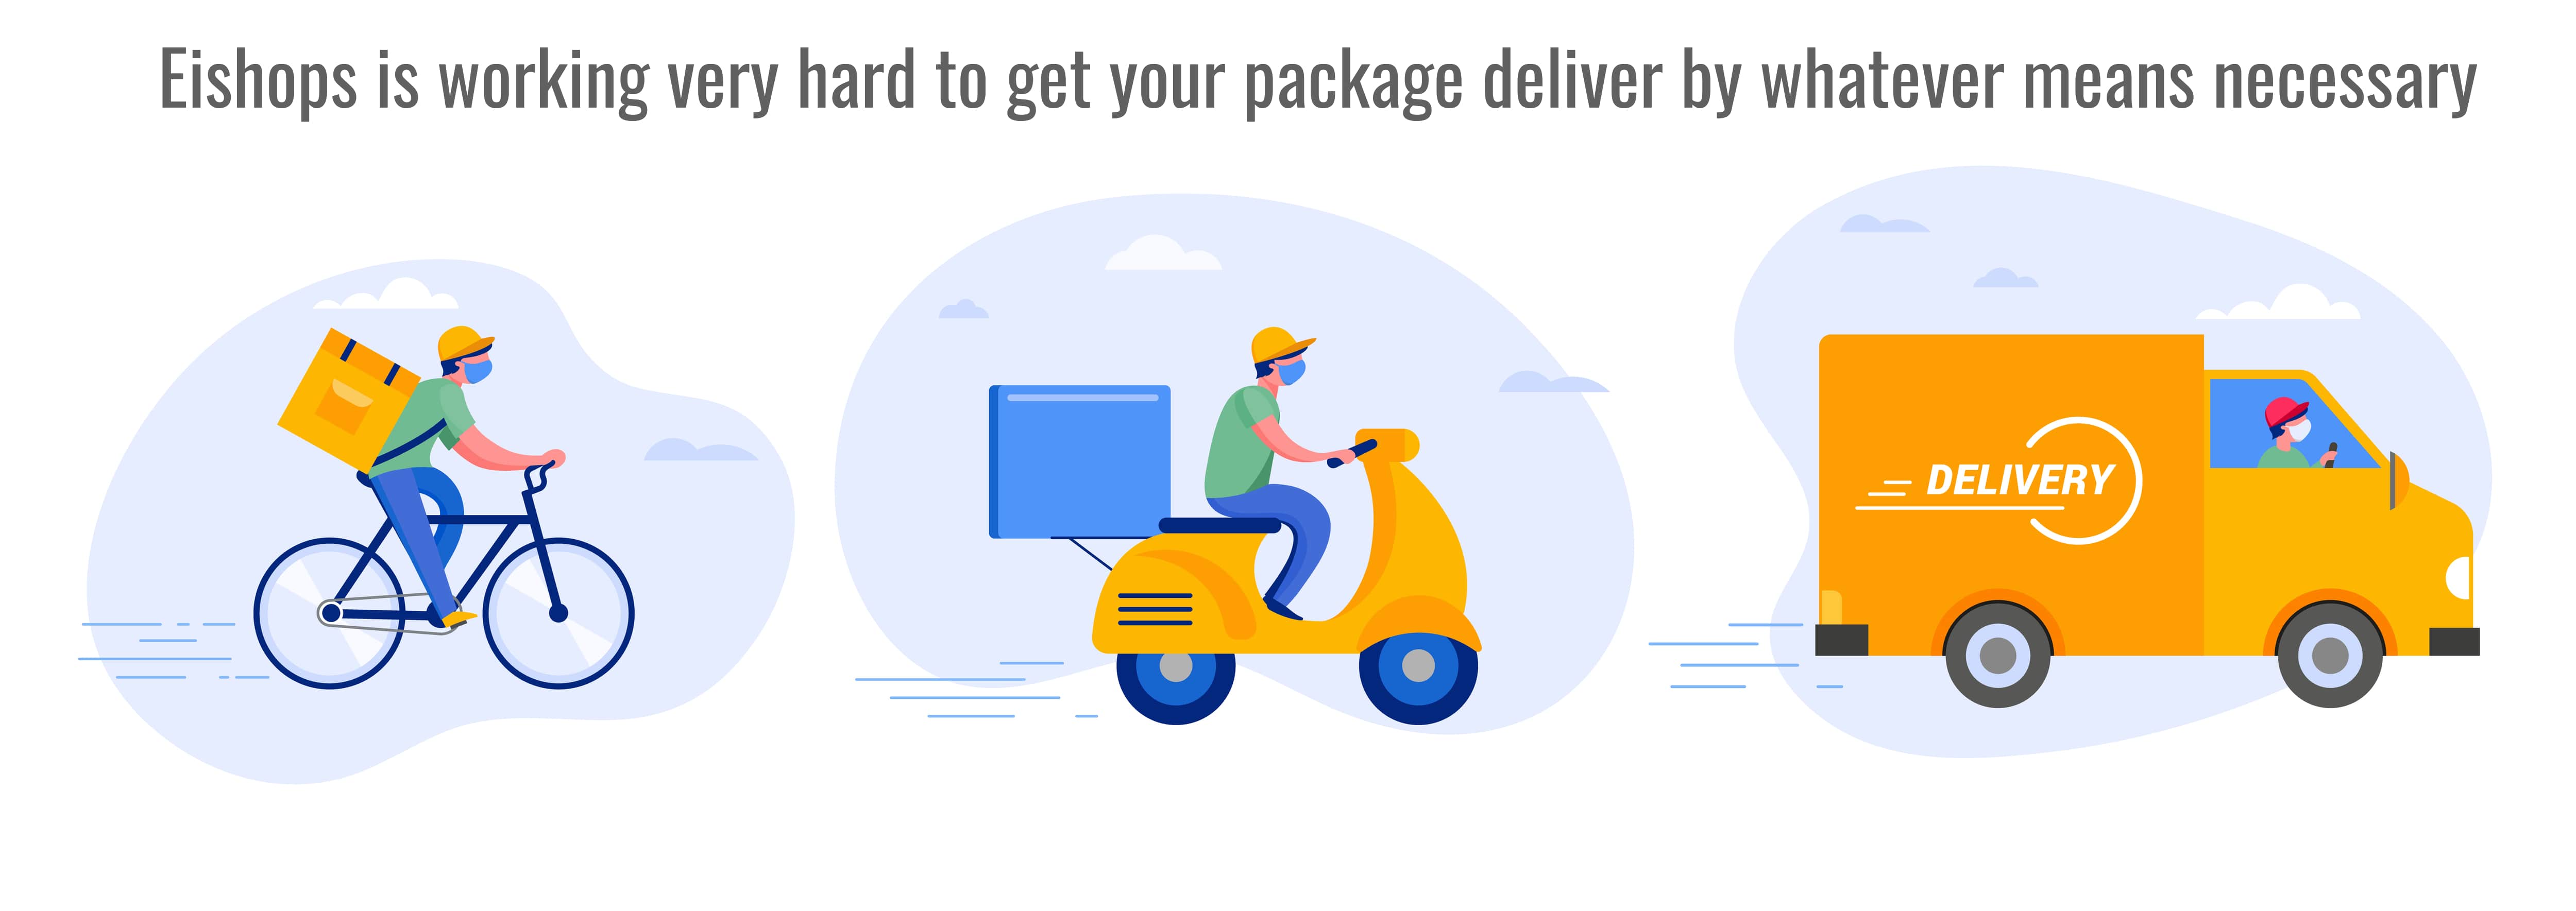 eishops is working very hard to get your package delivered by whatever means necessary